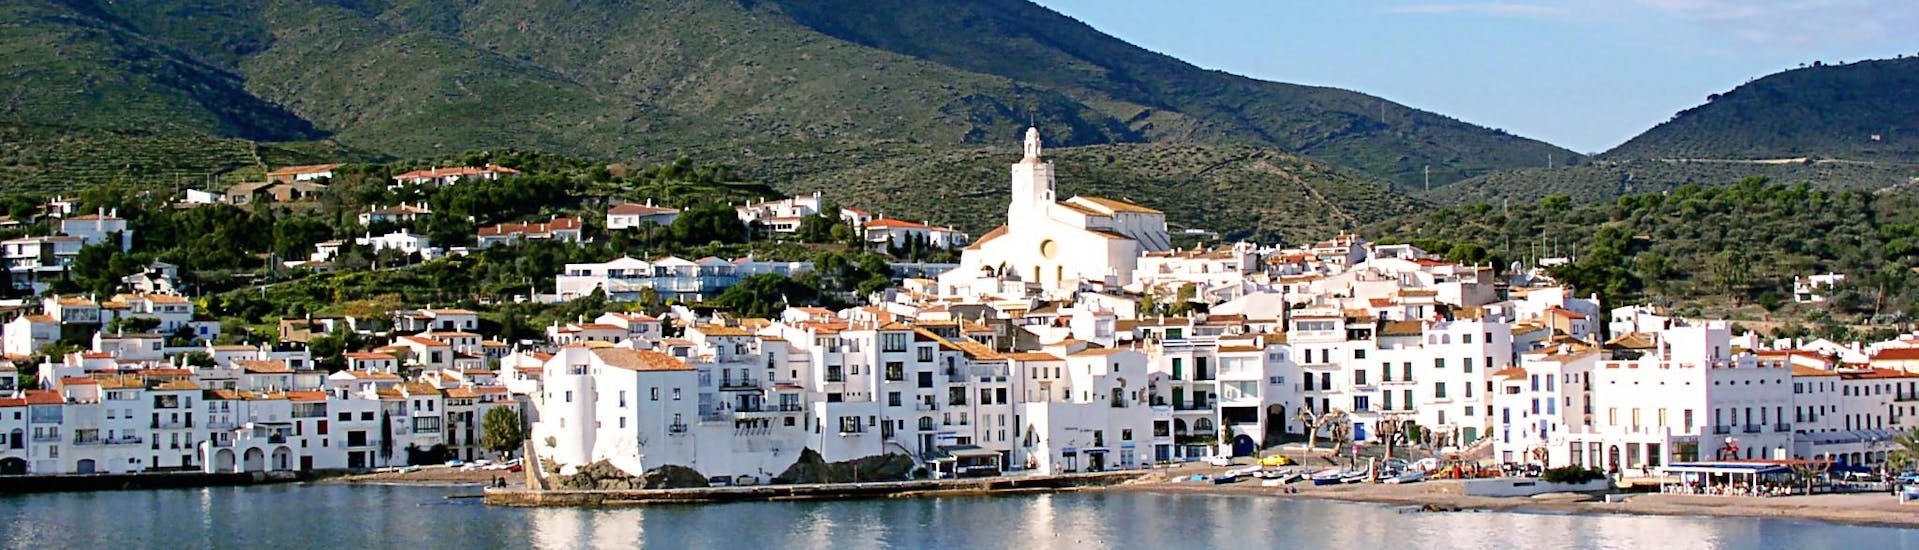 View of Cadaqués during one of the boat trips offered by Don Pancho.